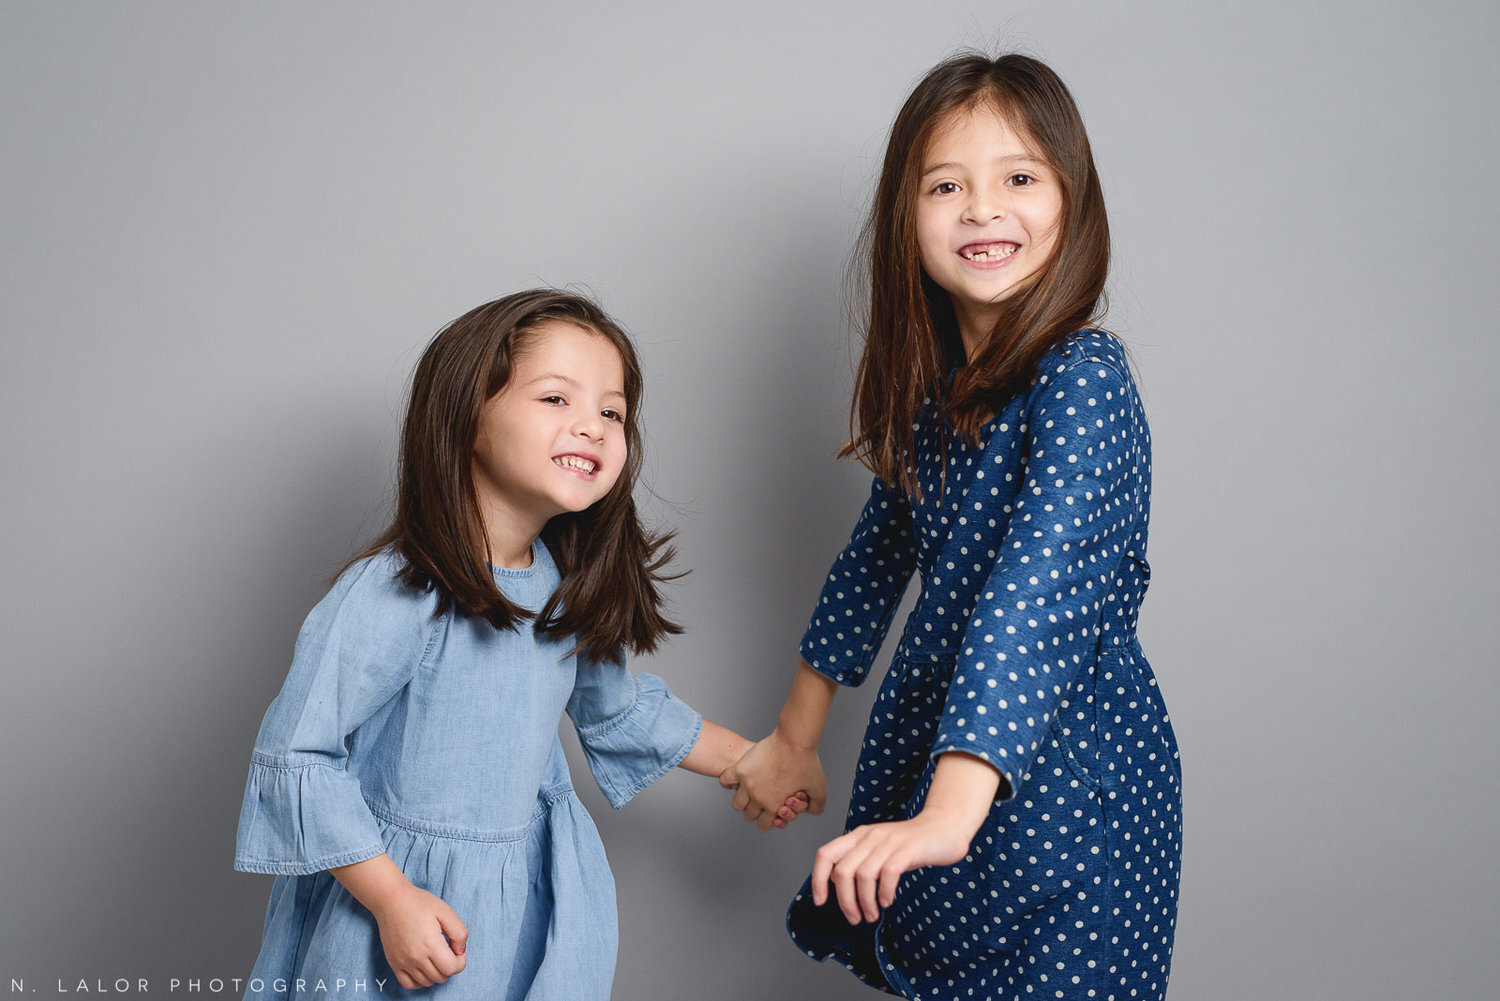 nlalor-photography-2016-12-13-studio-family-two-girls-greenwich-connecticut-6.jpg